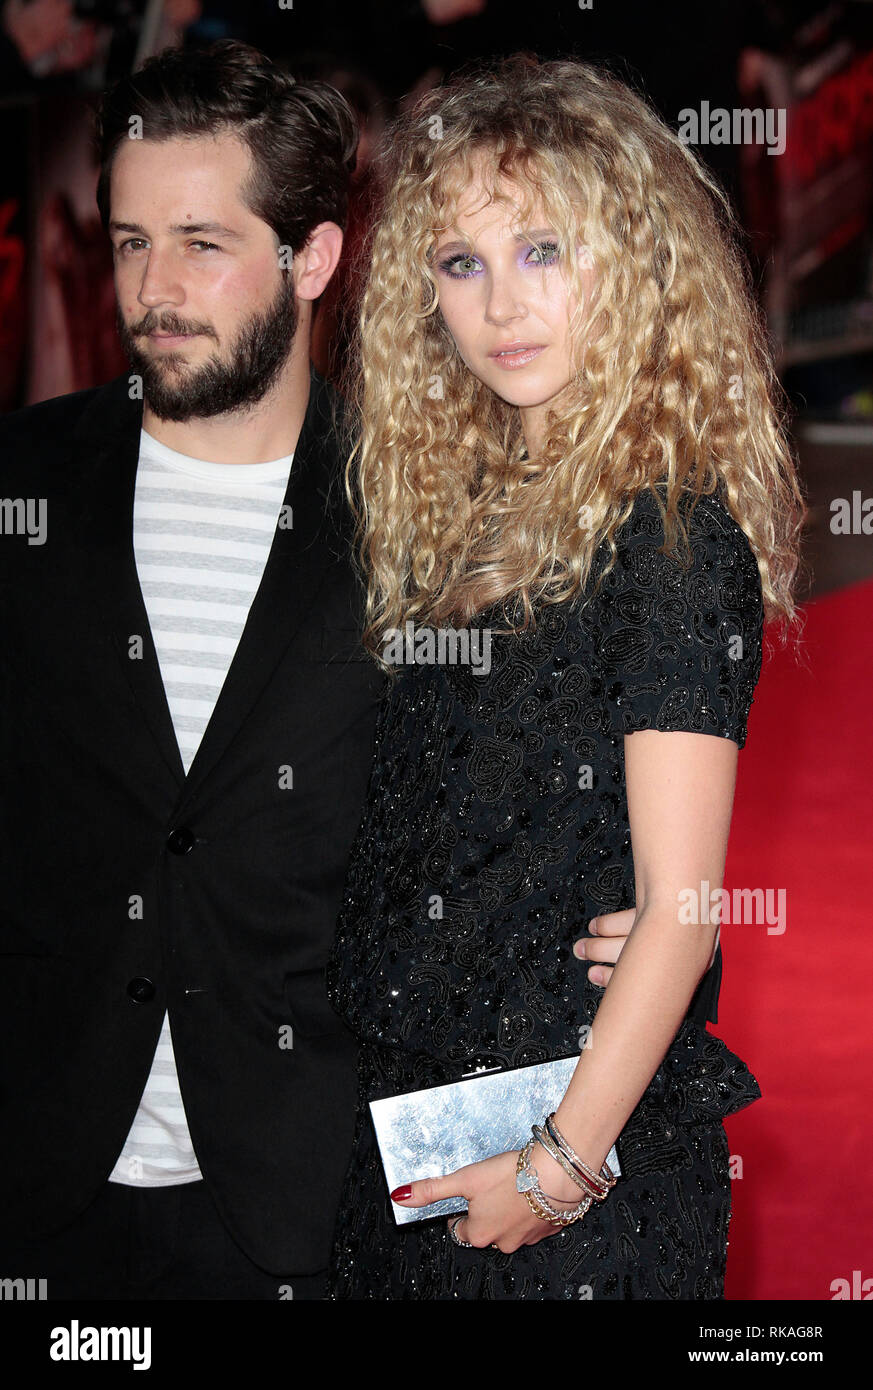 Oct 20, 2014 - 'Horns' UK Premiere Michael Angarano and Juno Temple arrive for premiere of Daniel Radcliffe's new movie Horns which was held at Odeon  Stock Photo